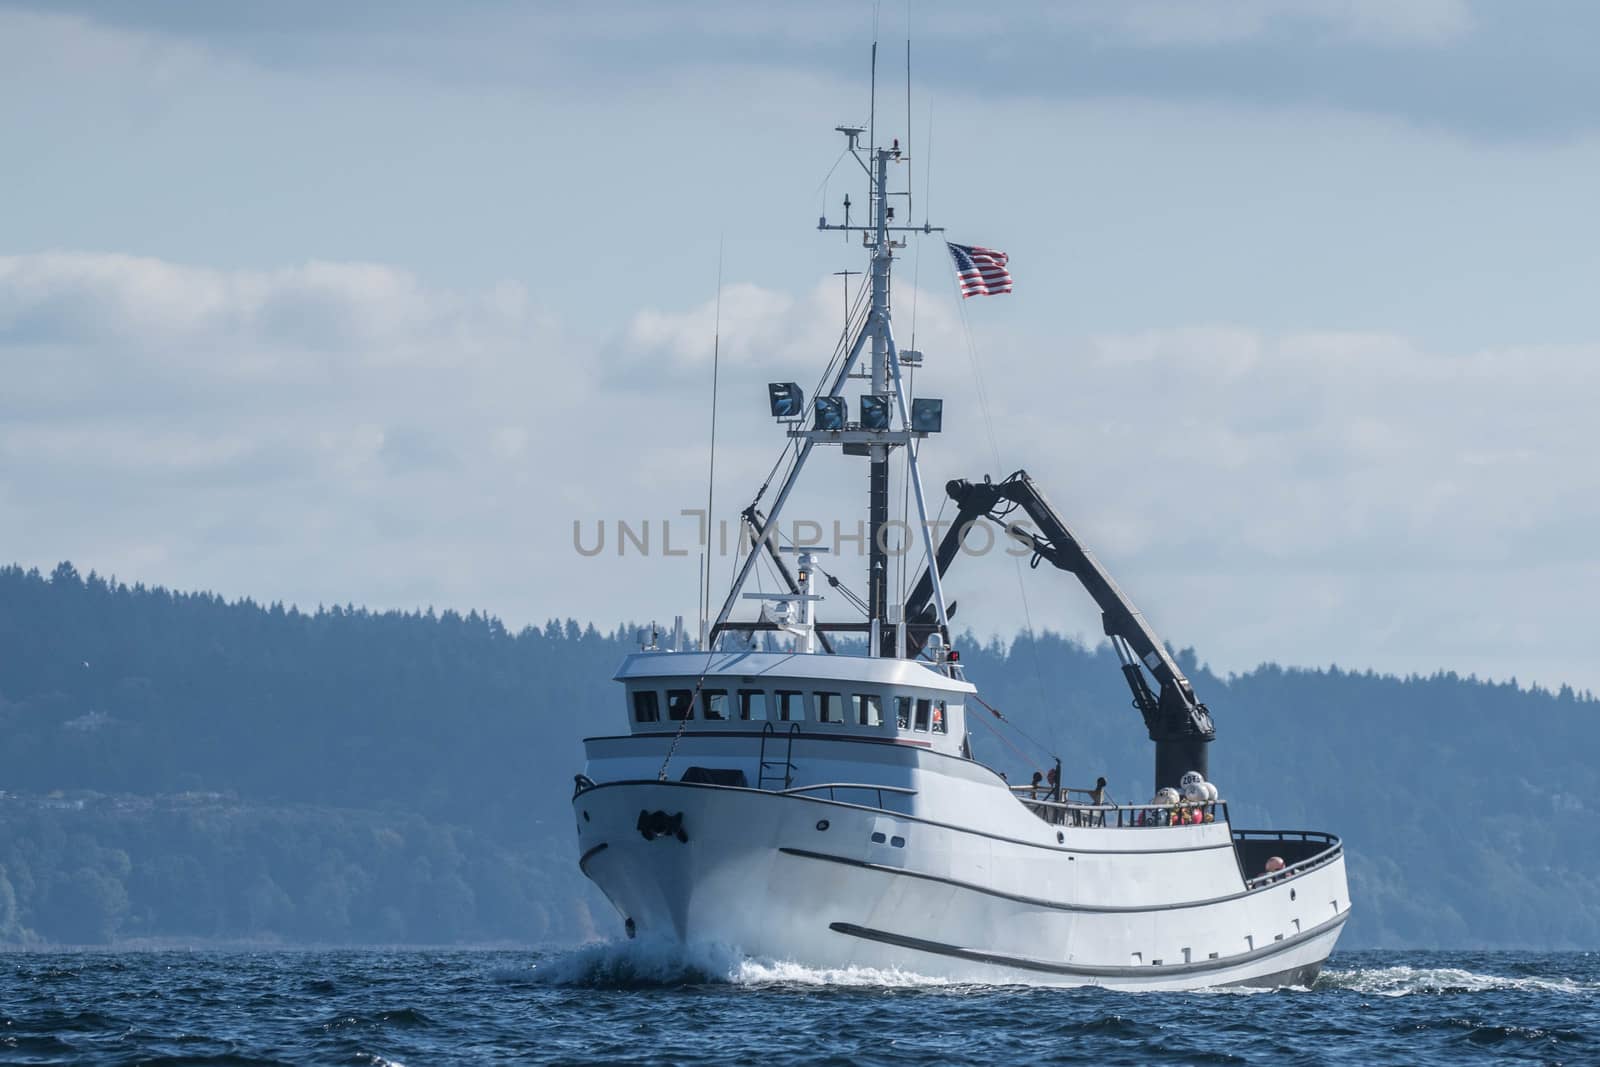 Crab fishing vessel Paragon underway under lightly cloudy skies and calm seas in Puget Sound.